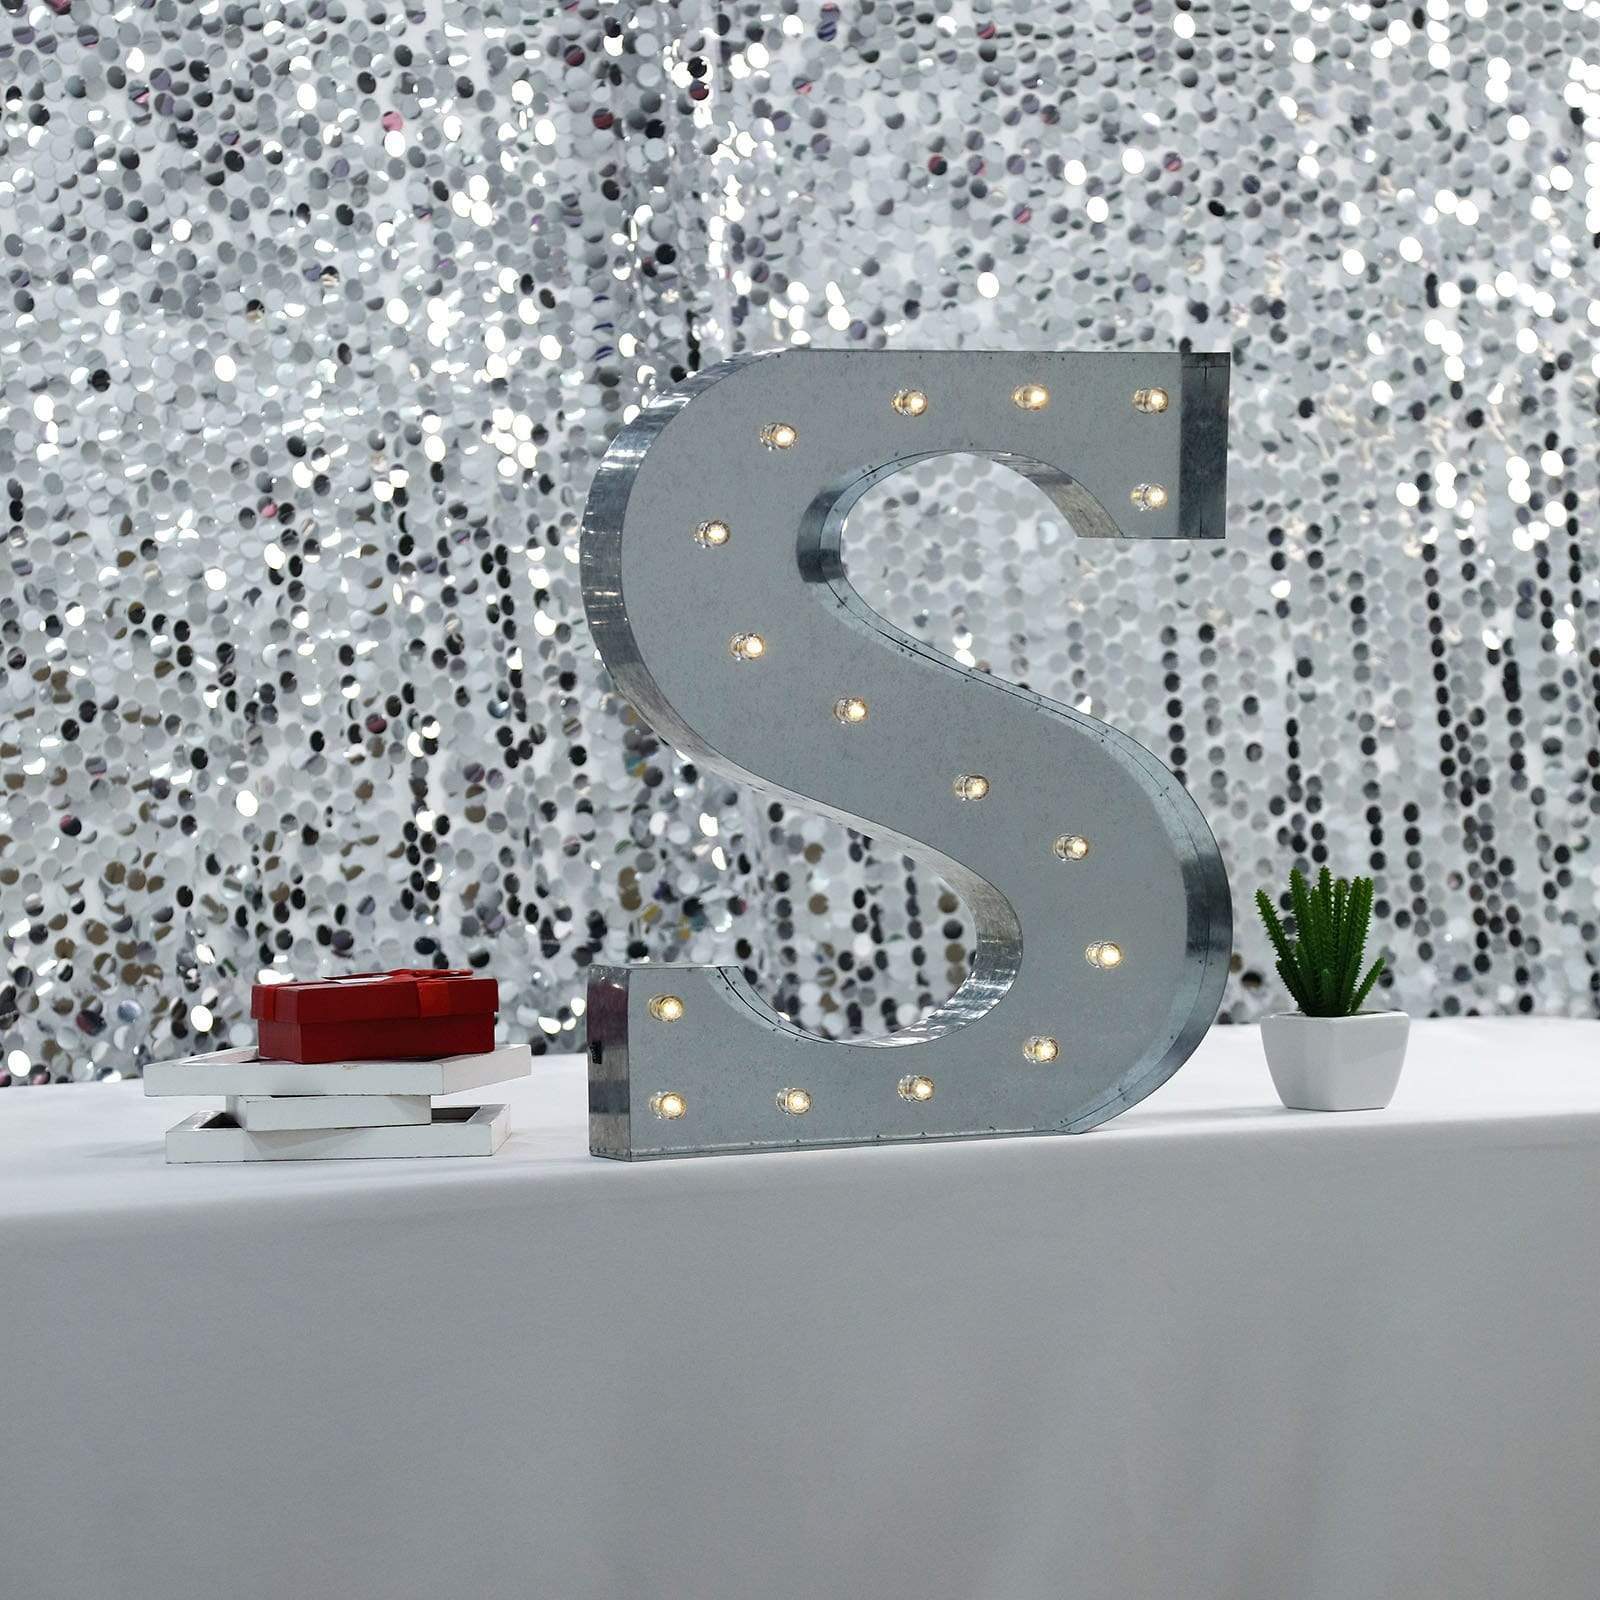 Silver Marquee Letter Warm White LED Lighted Sign